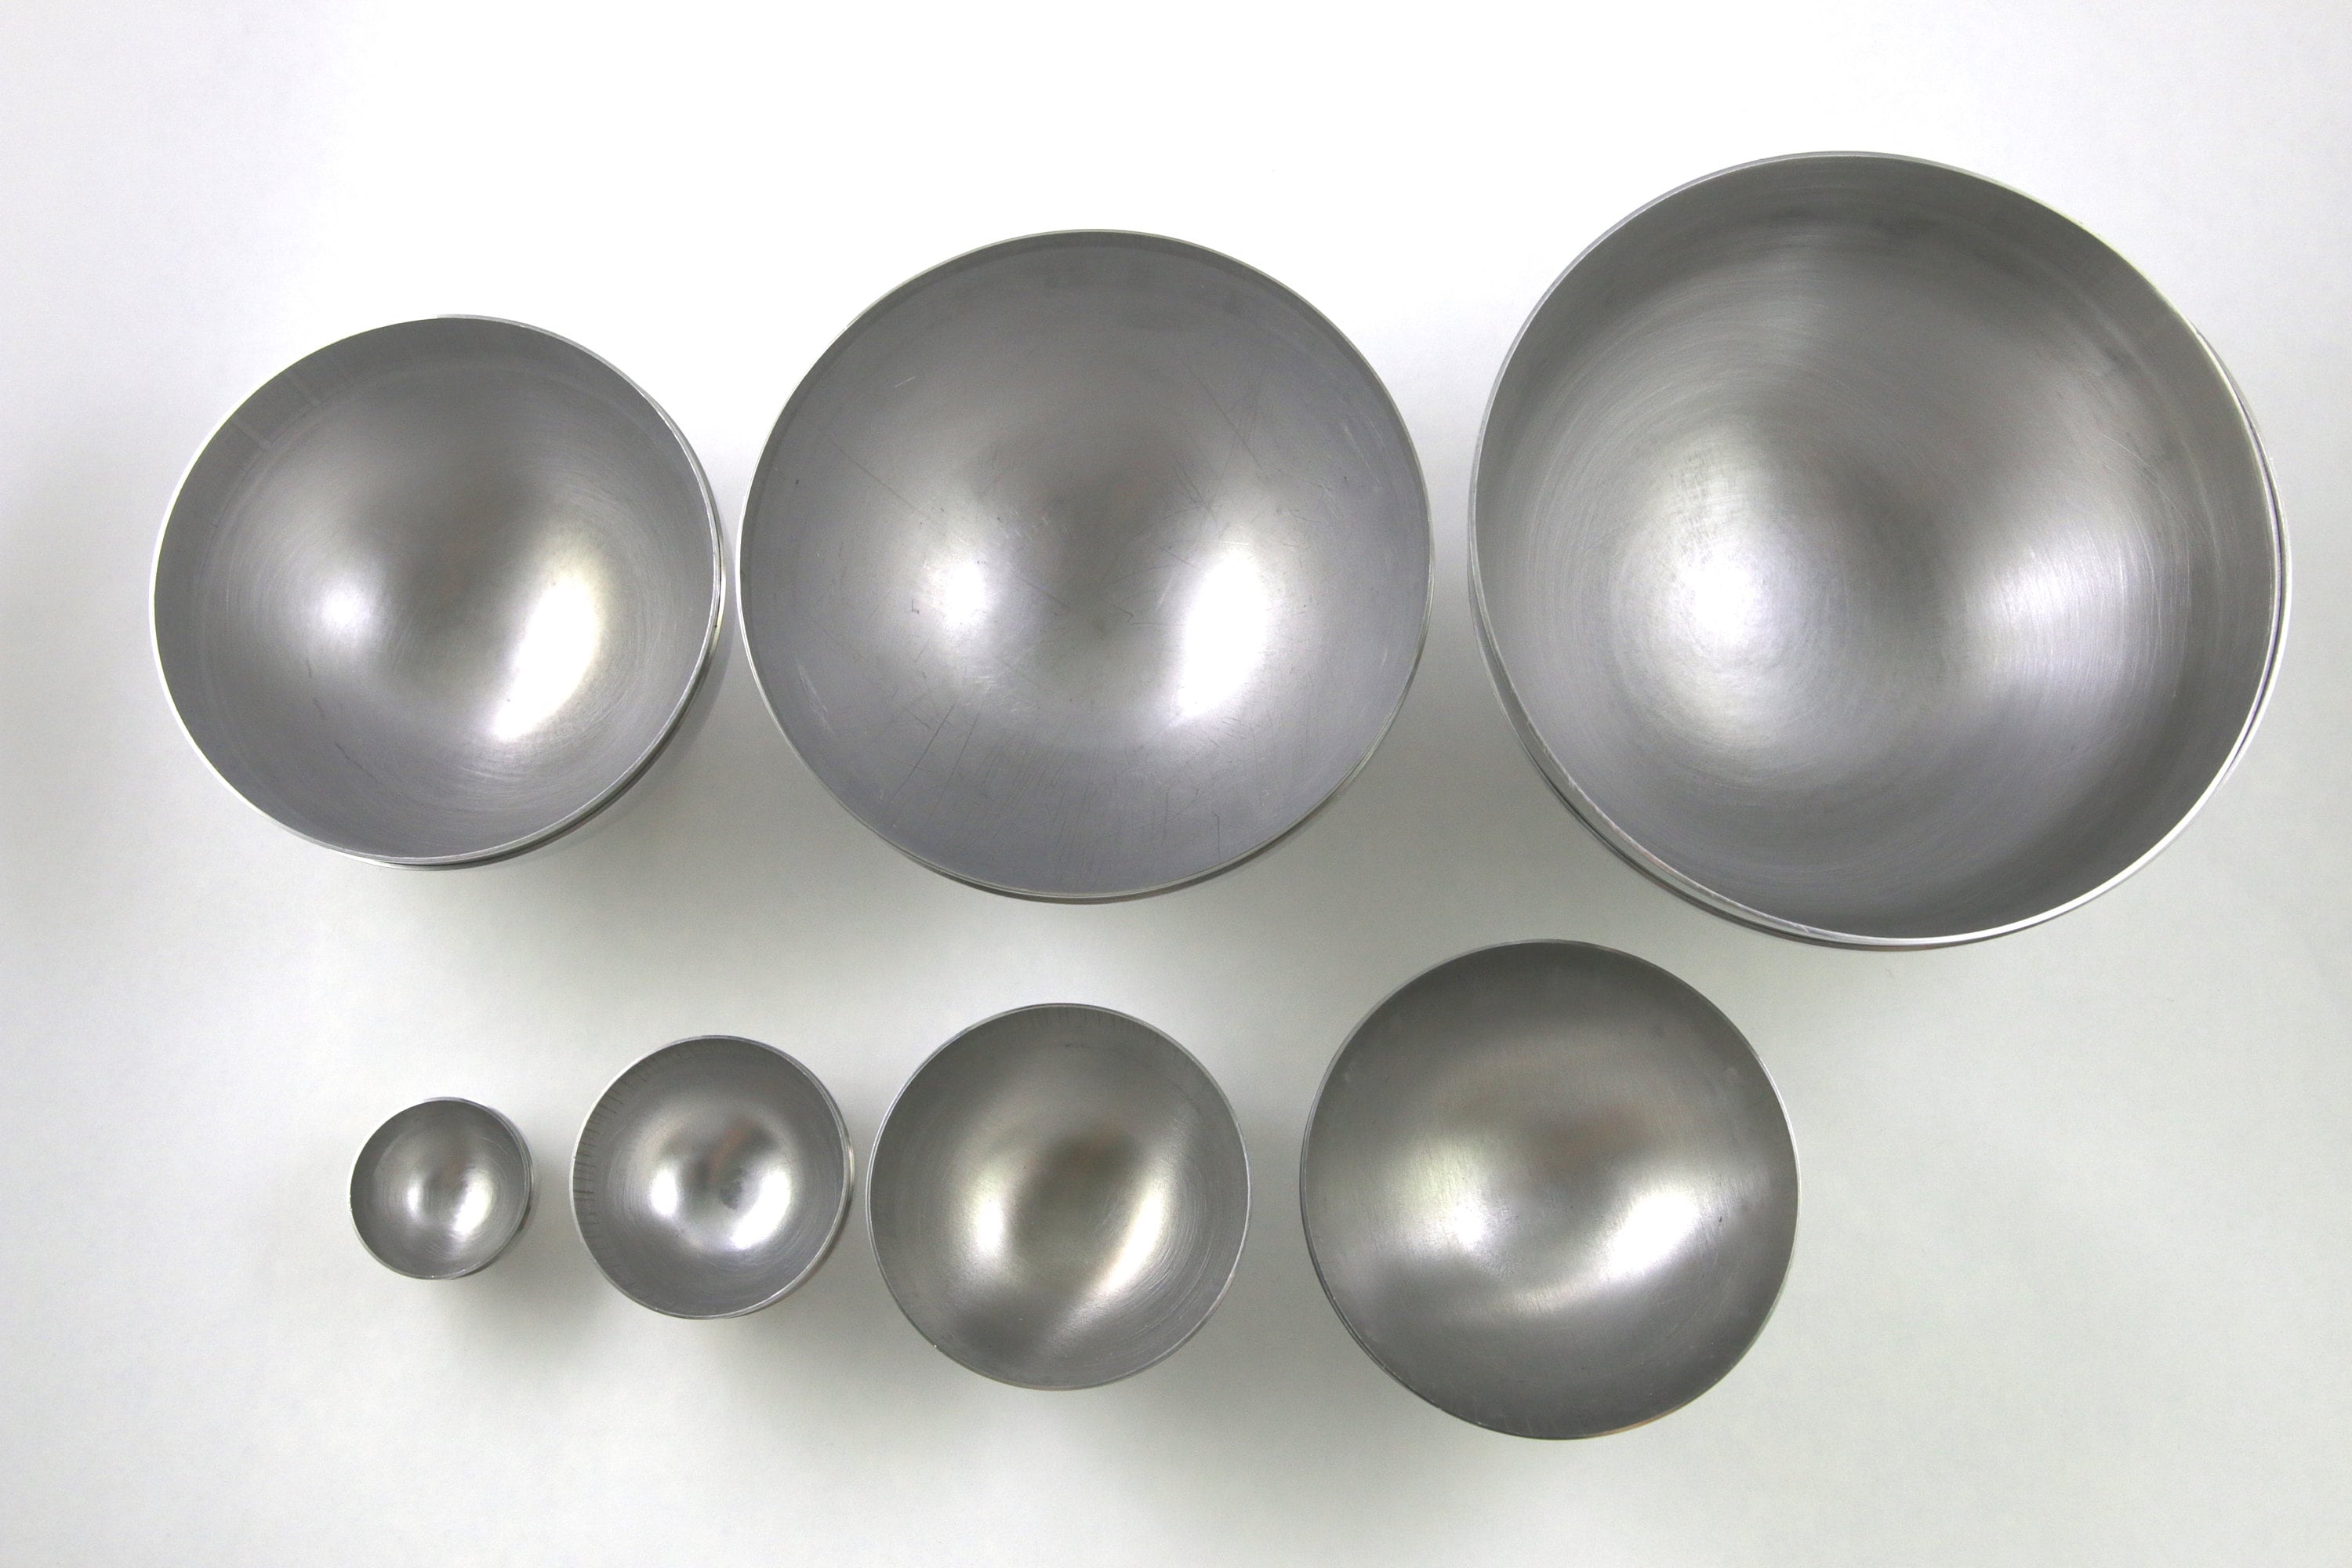 LITTLEFUN 304 Stainless Steel Bath Bomb Mold with 2 Sizes 4 Sets 8 Pieces  Hemispheres for Making Your DIY Craft Soap ✮Unique Design Latch for Large